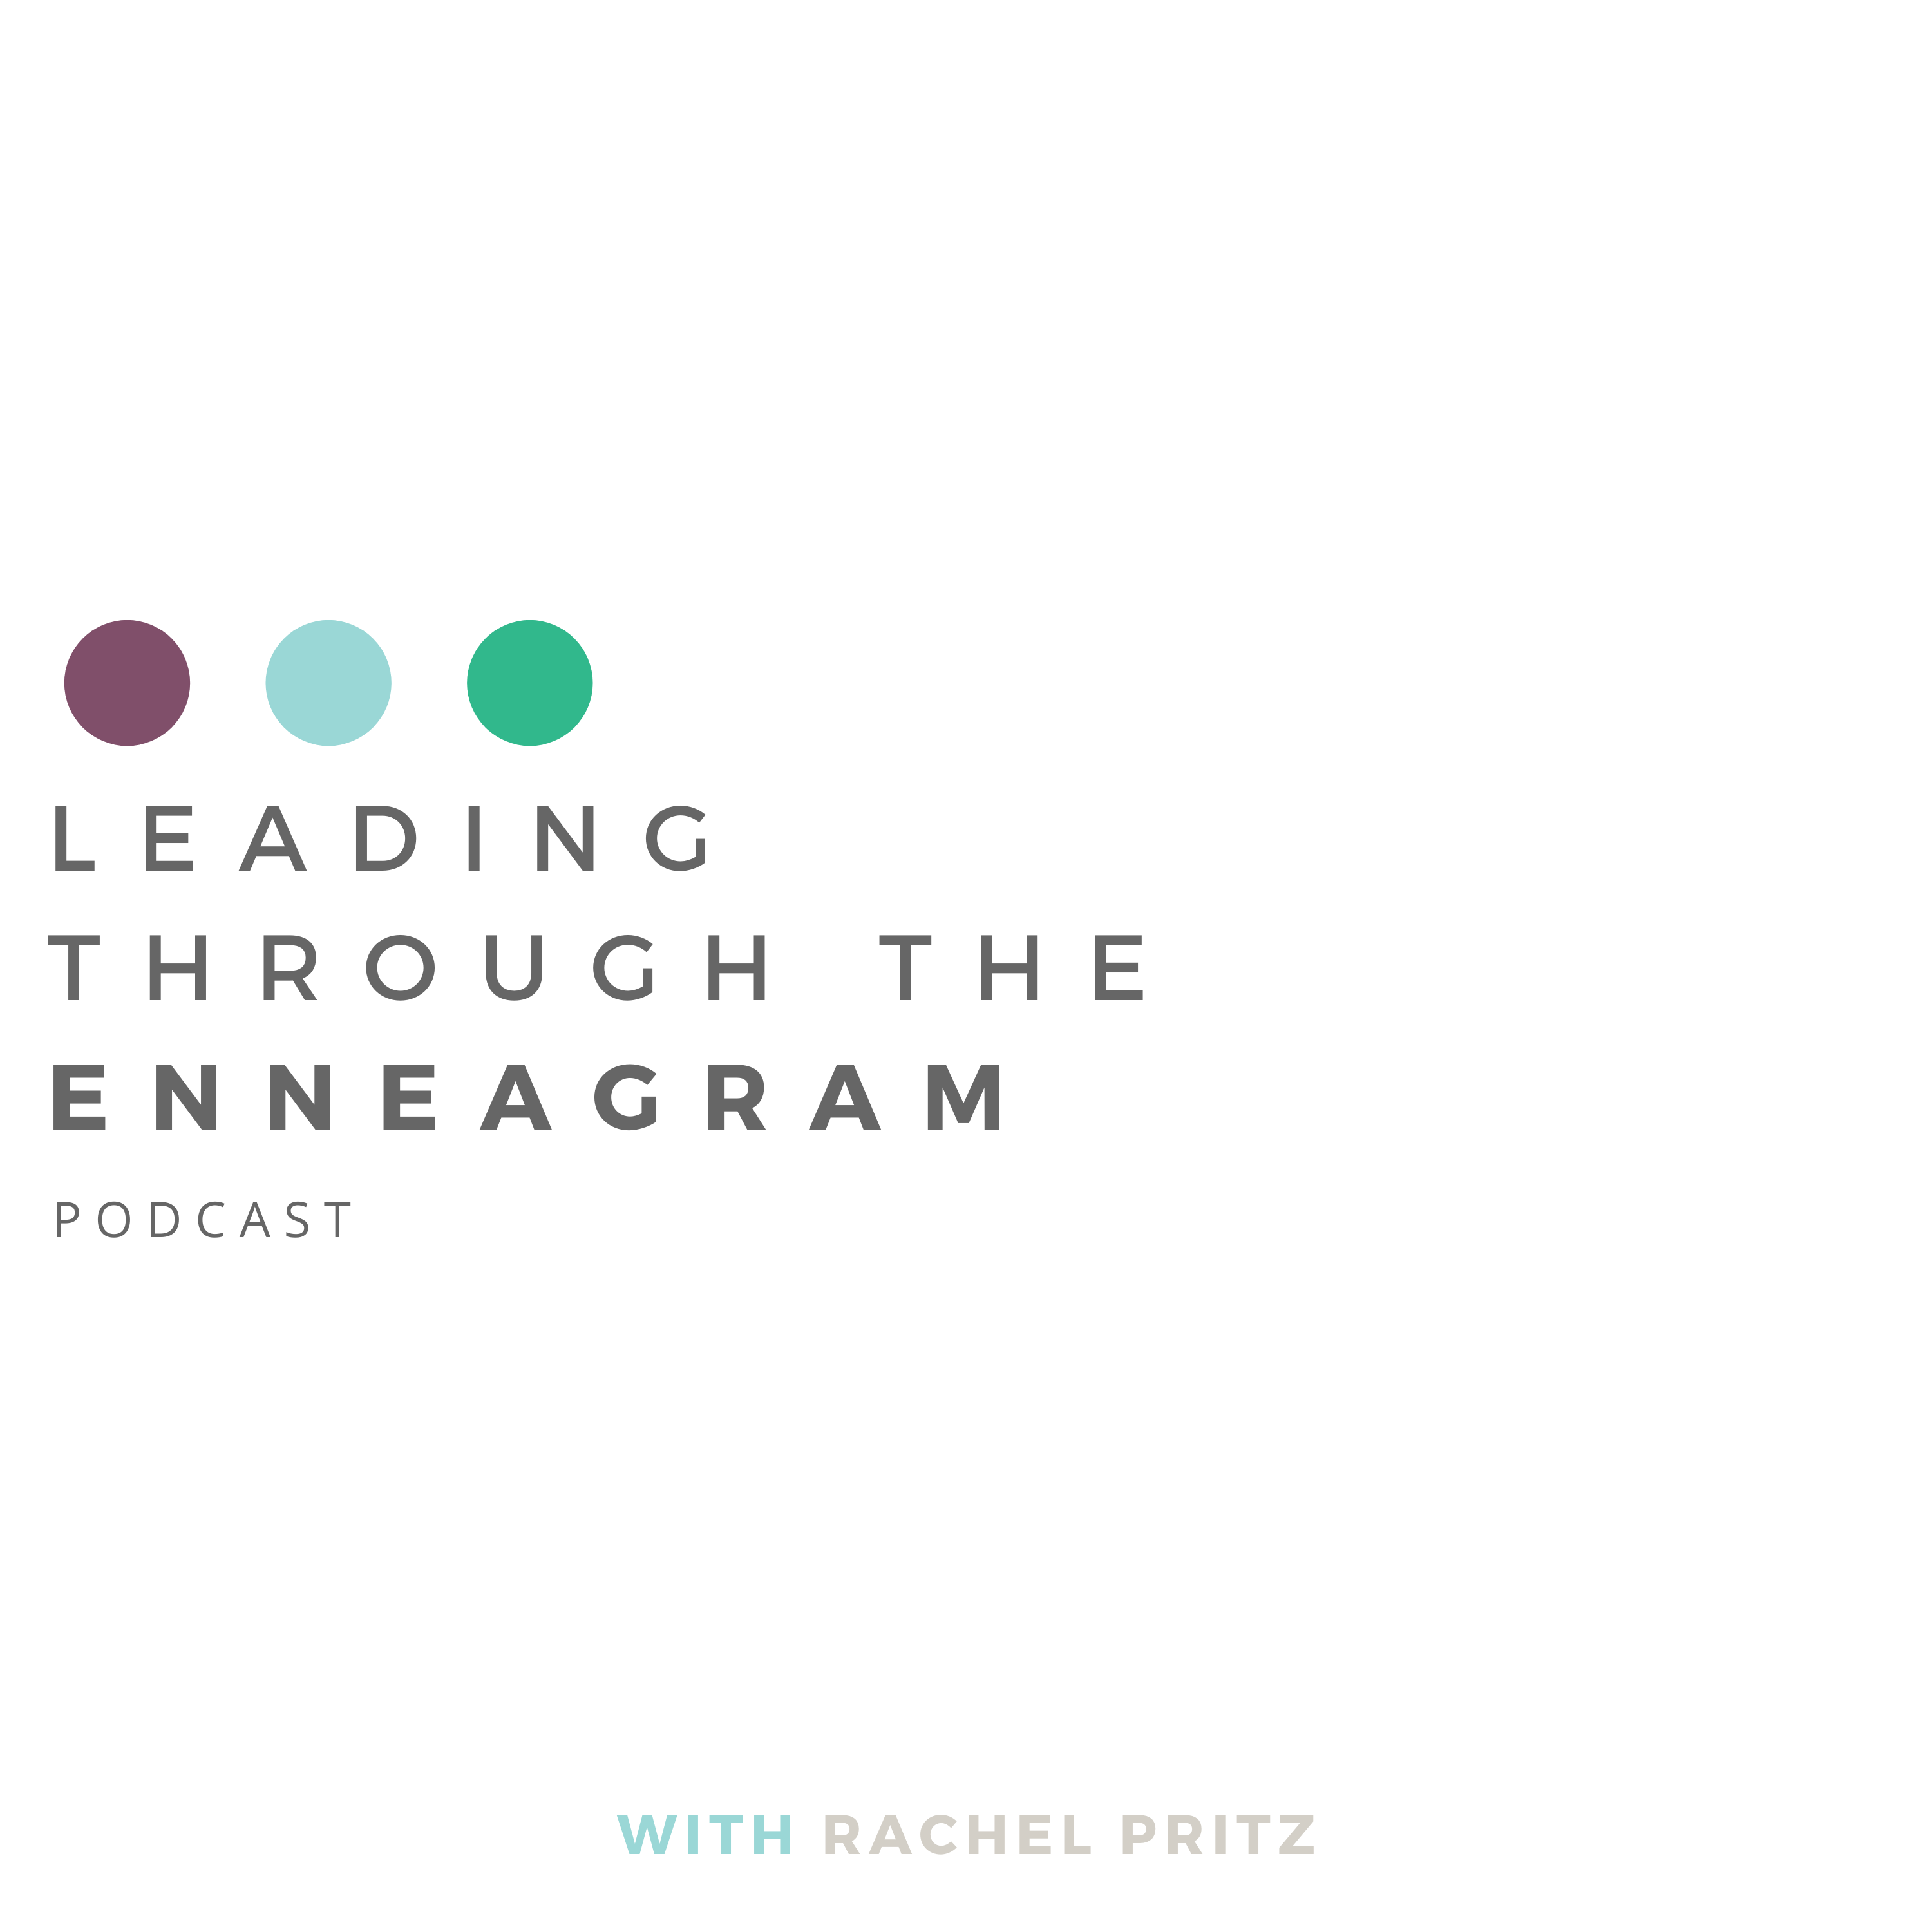 Leading Through the Enneagram Podcast